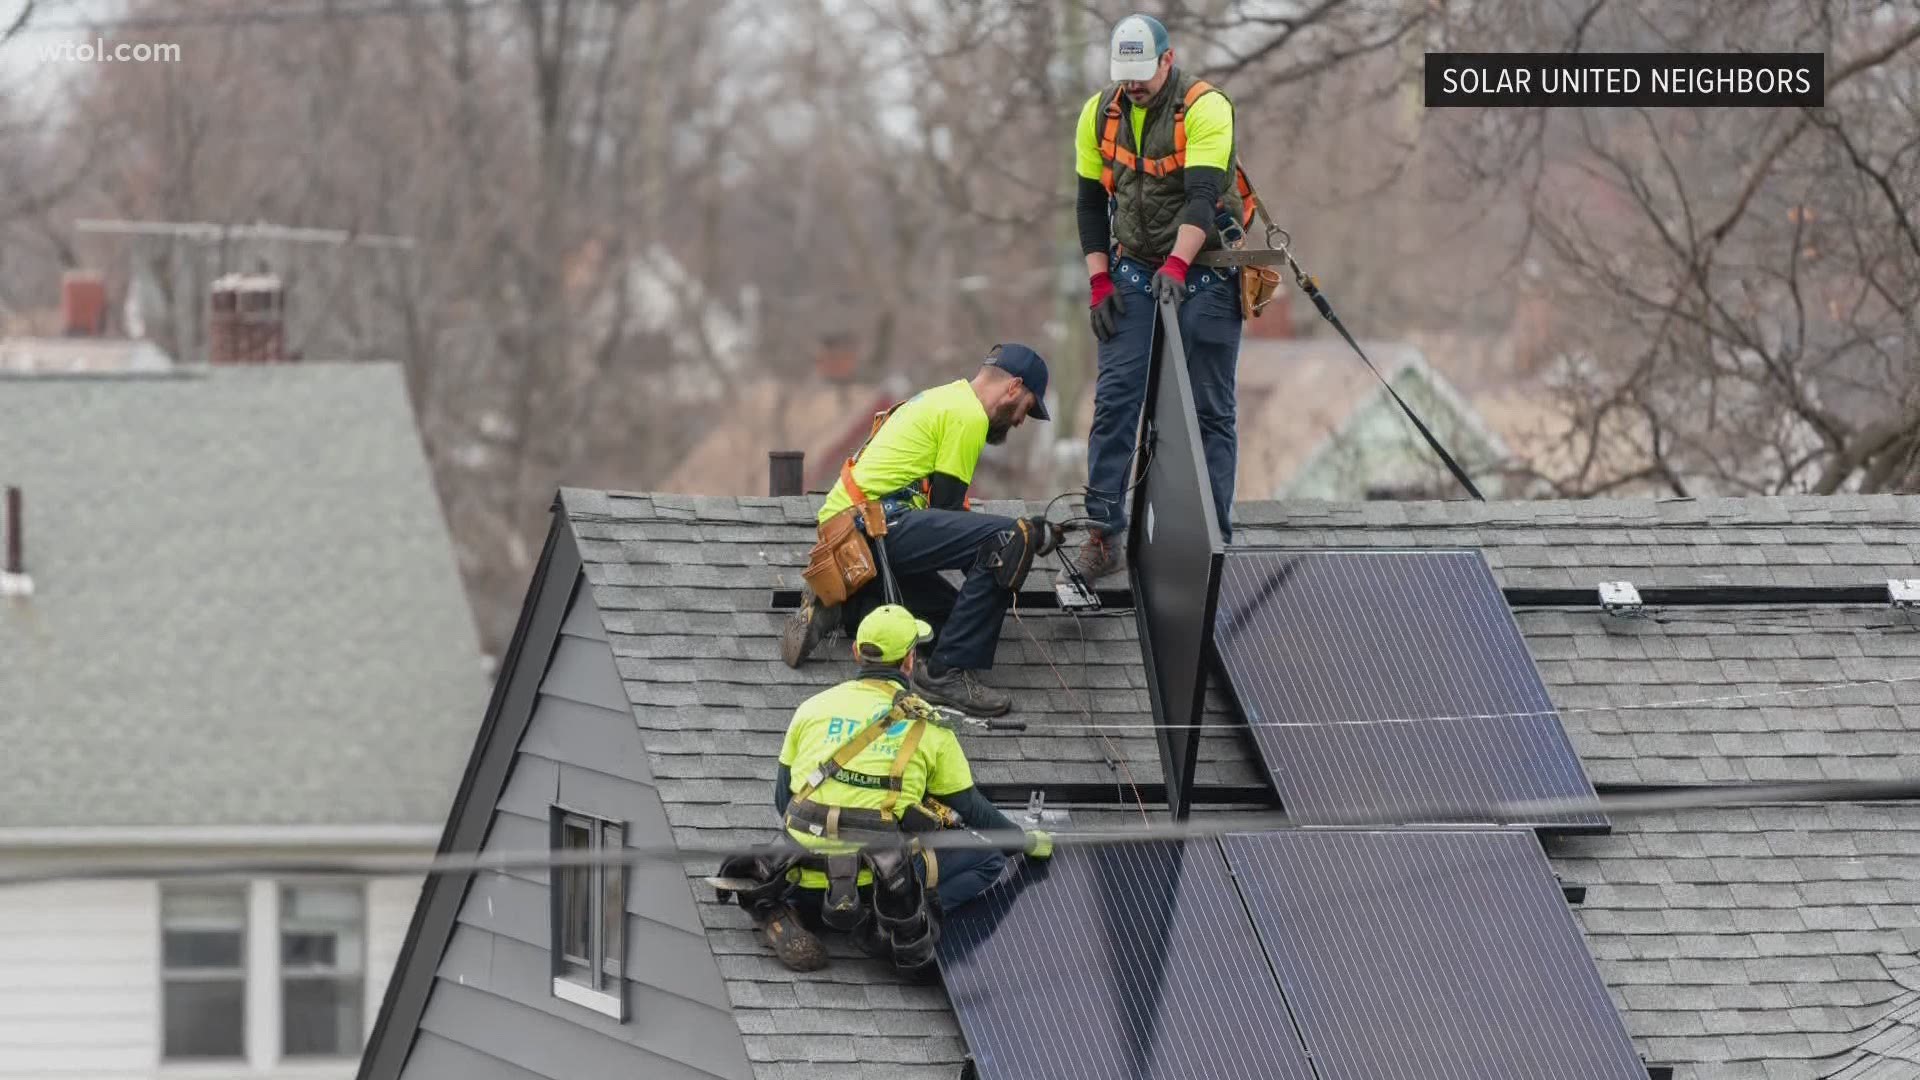 Solar United Neighbors, a non-profit, is aiming to gather 50-150 Lucas County residents interested in switching to solar power at a better price.